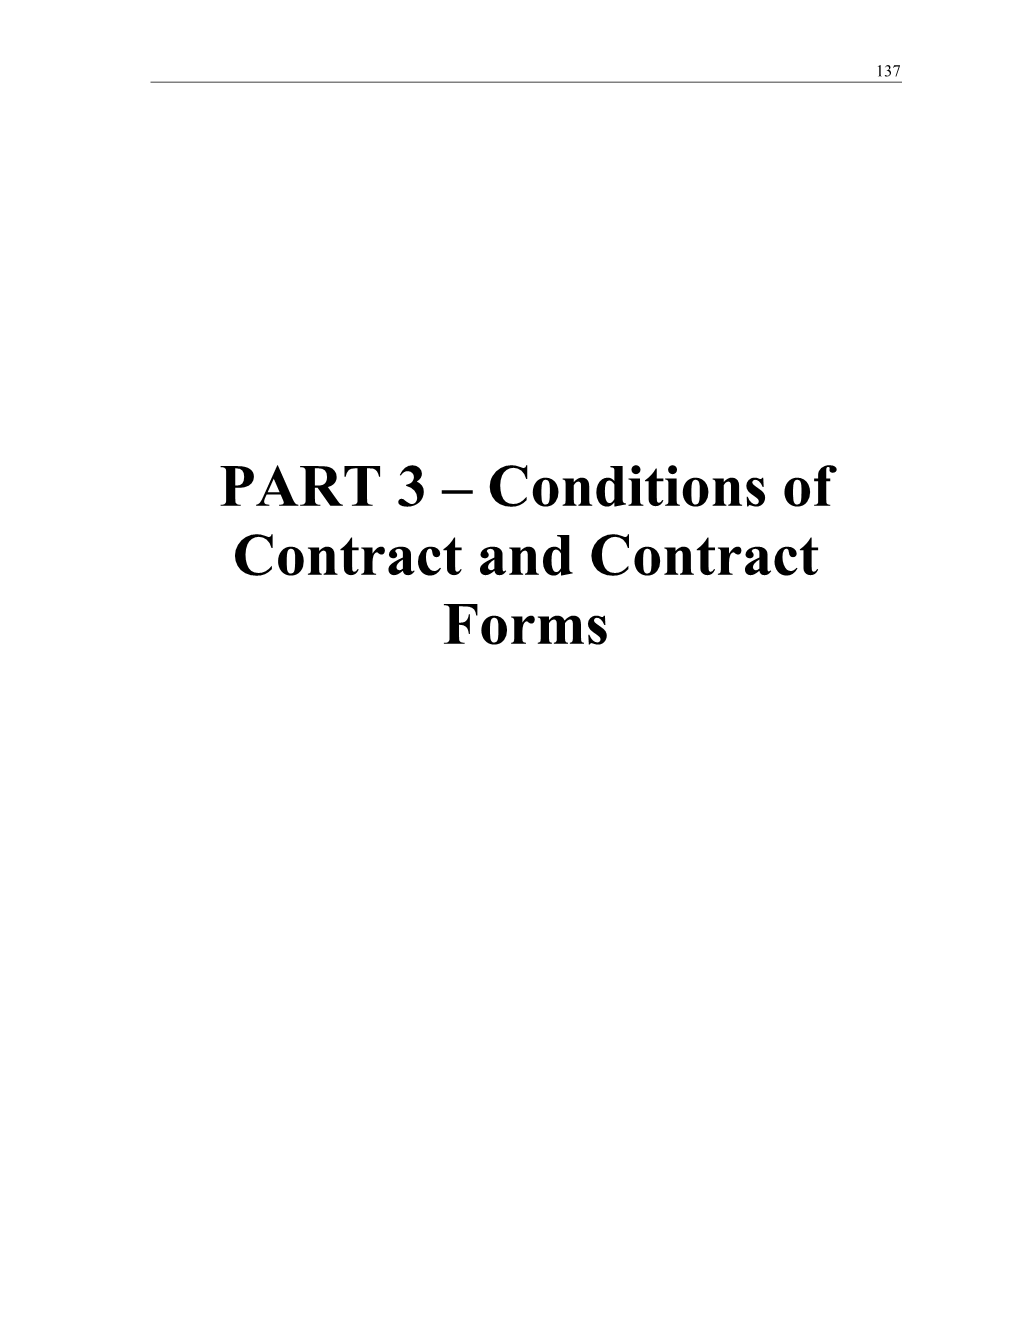 PART 3 Conditions of Contract and Contract Forms